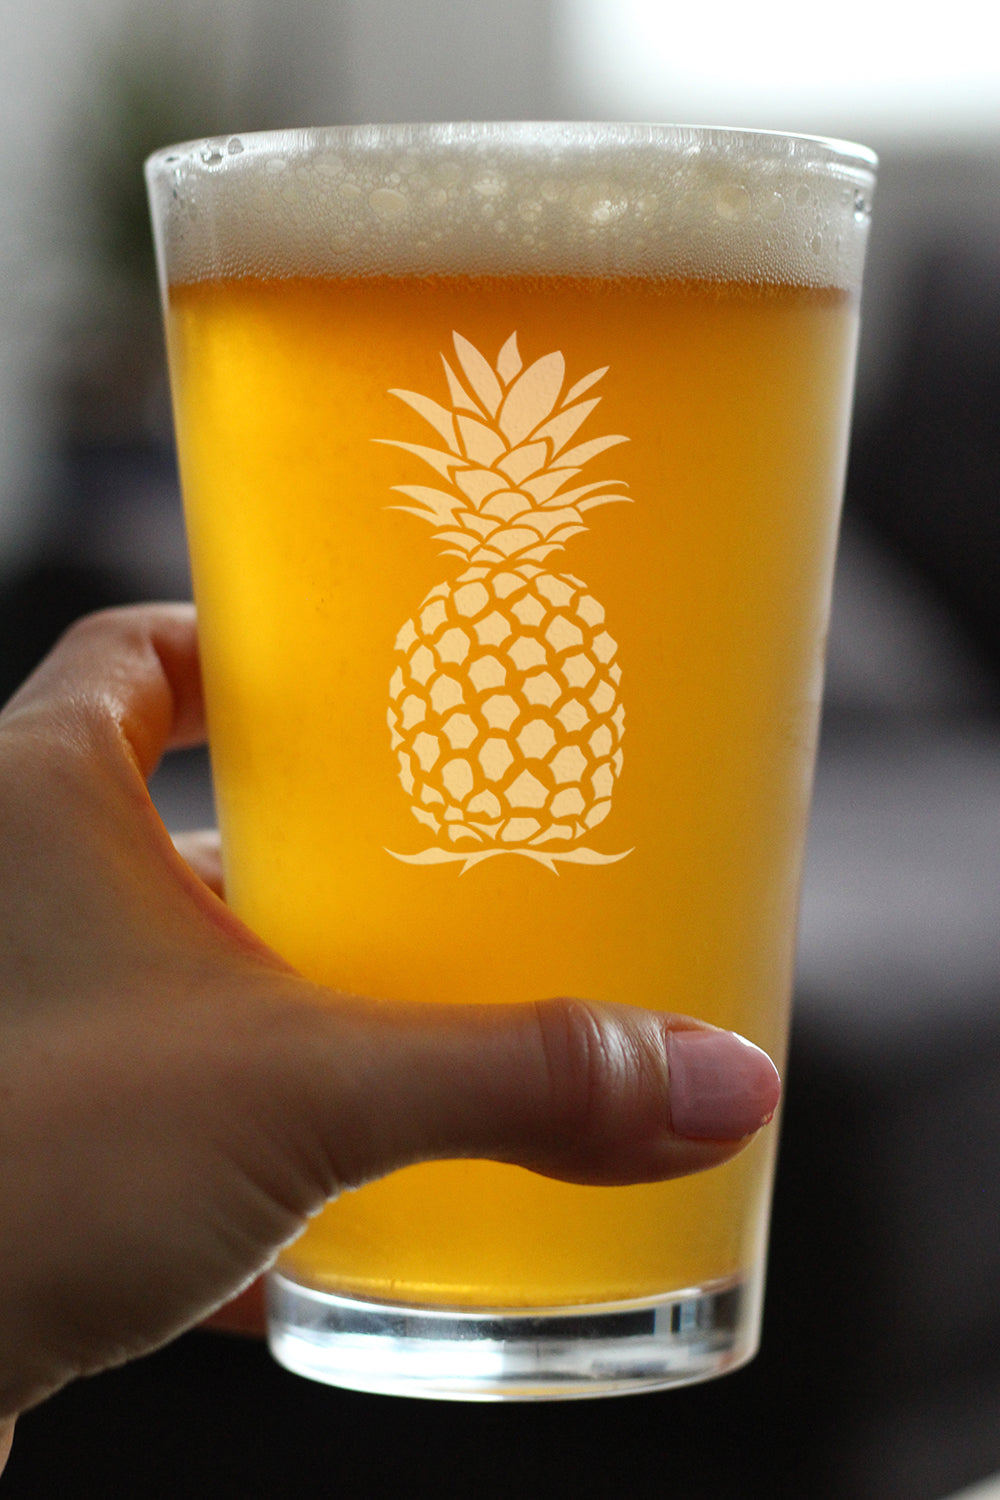 Pineapple Pint Glass for Beer - Fun Tropical Themed Decor and Gifts - 16 oz Glasses